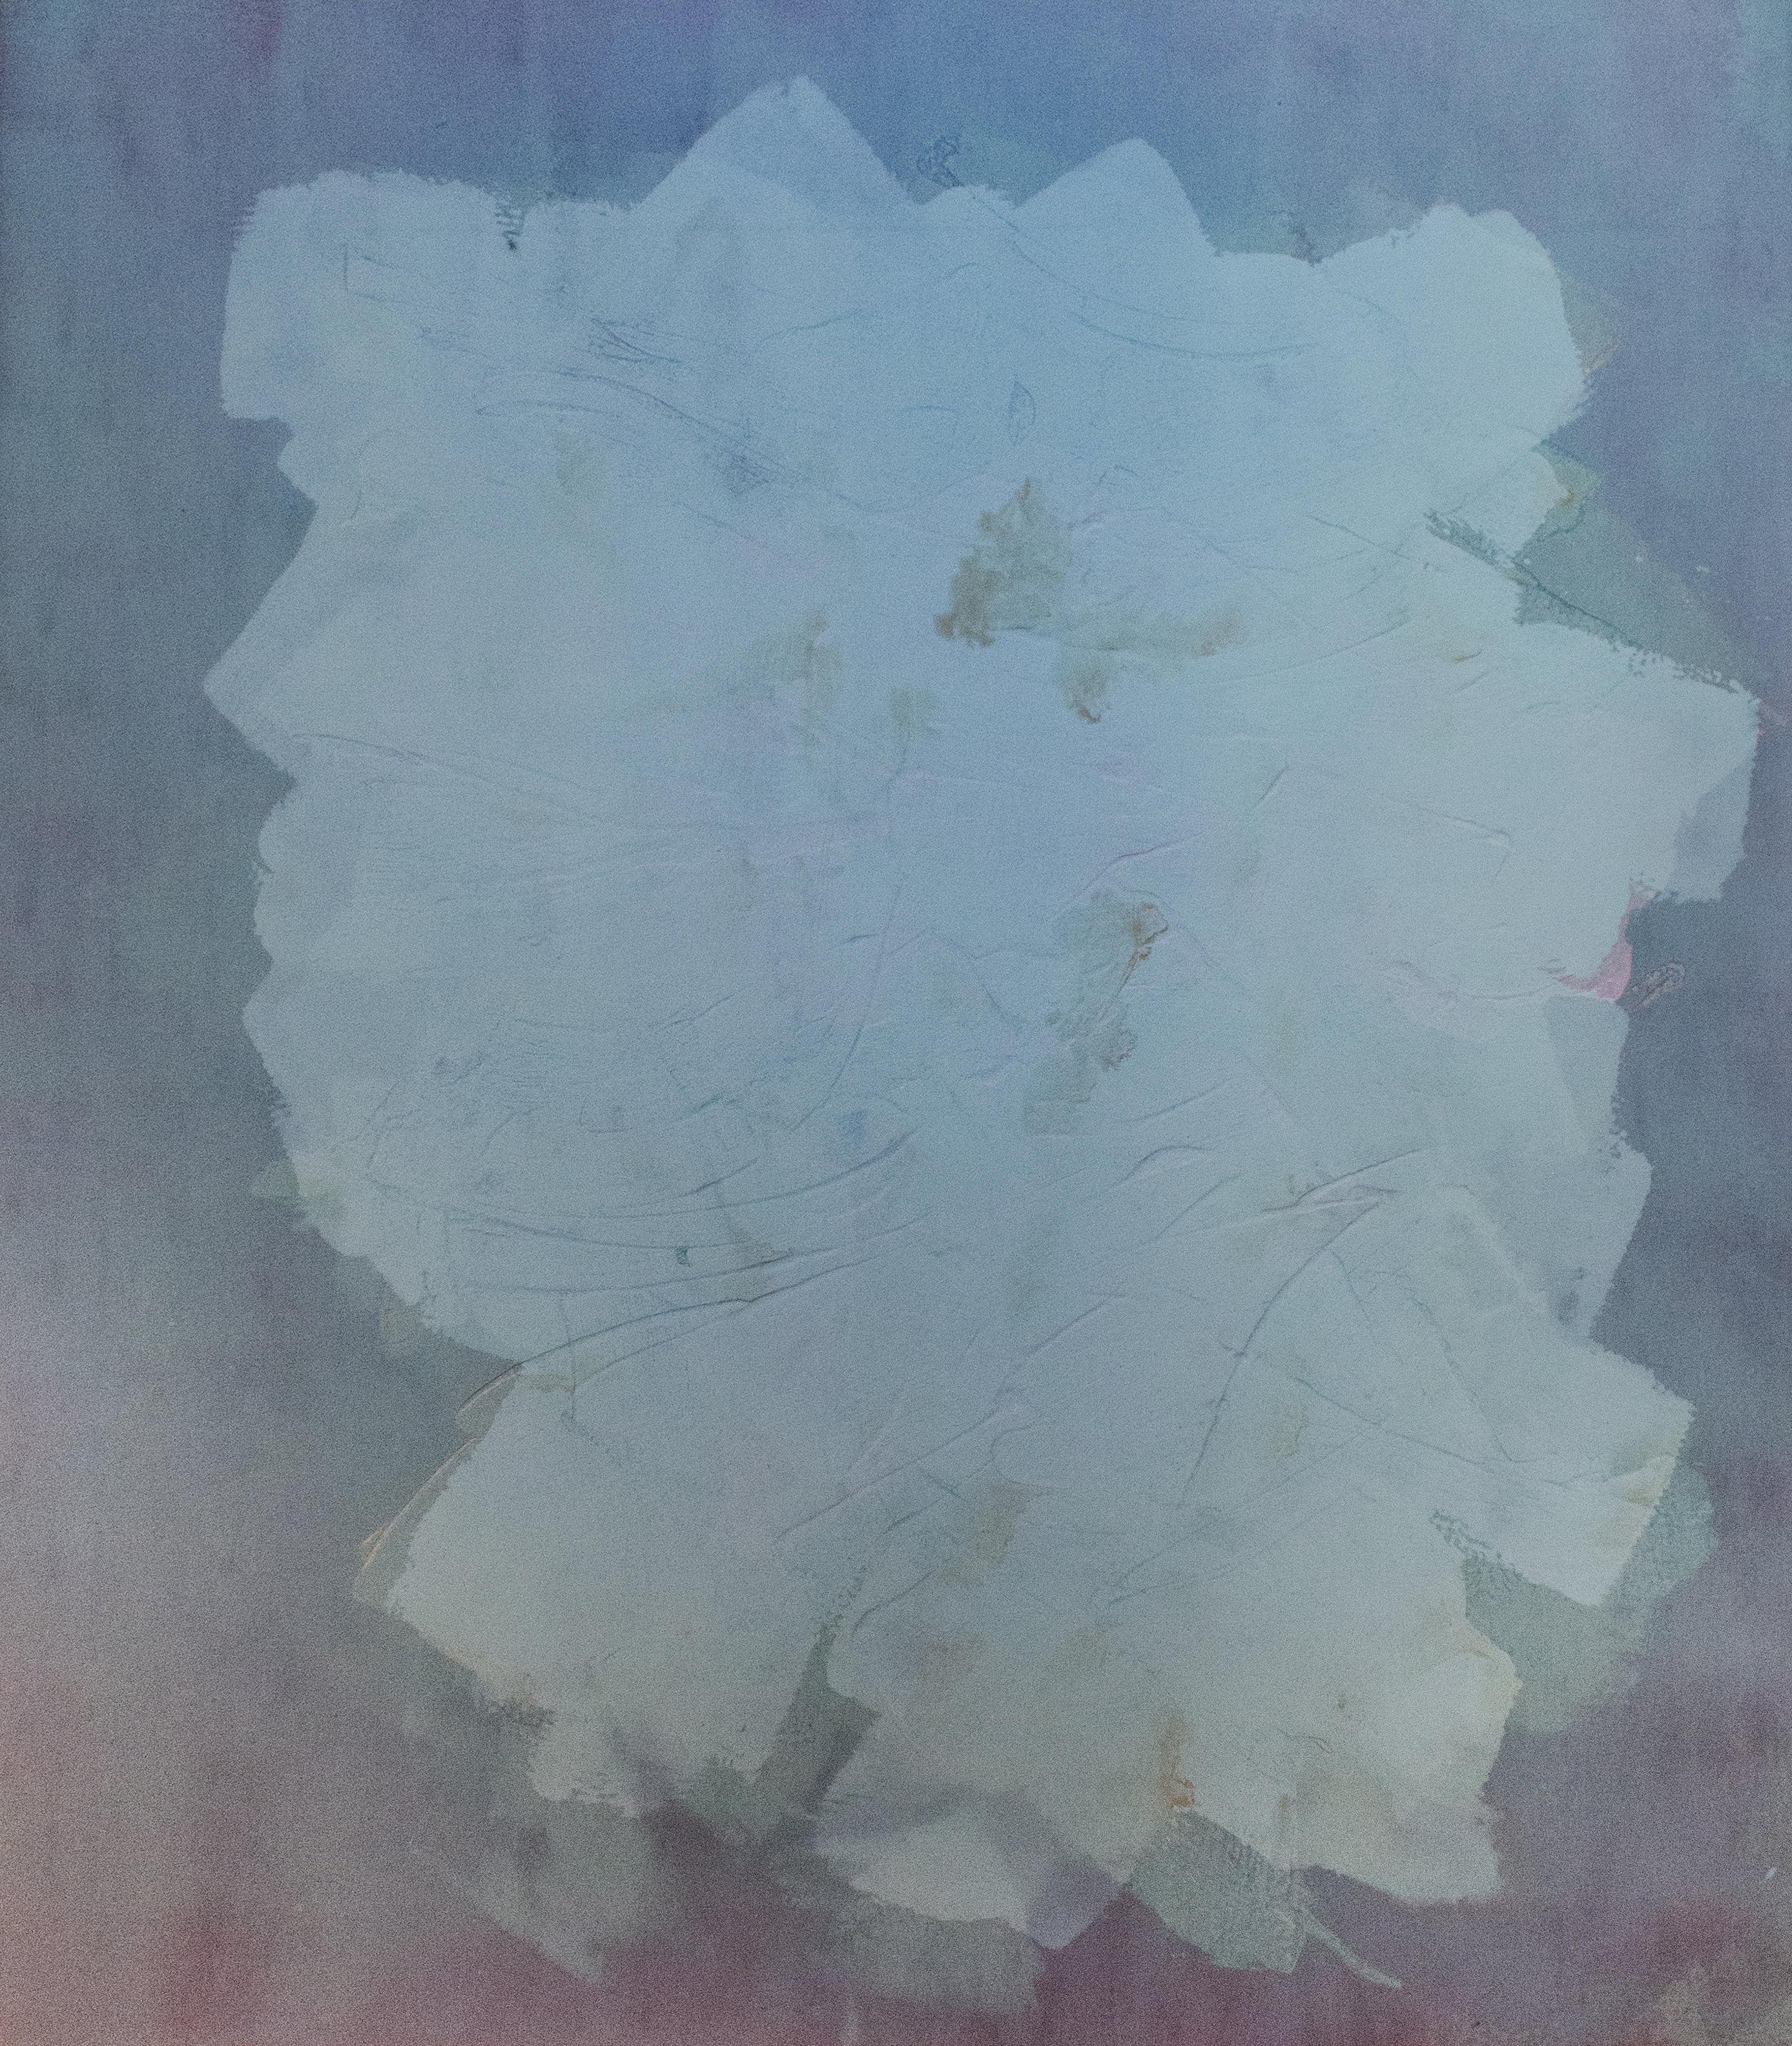 Sherron Francis
Grey II, 1975
Signed, titled and dated on the reverse
Acrylic on canvas
80 x 69 1/2 inches

Artists such as Helen Frankenthaler, Morris Louis, Dan Christensen, and Sam Francis are already well-known names. However, Sherron Francis, a